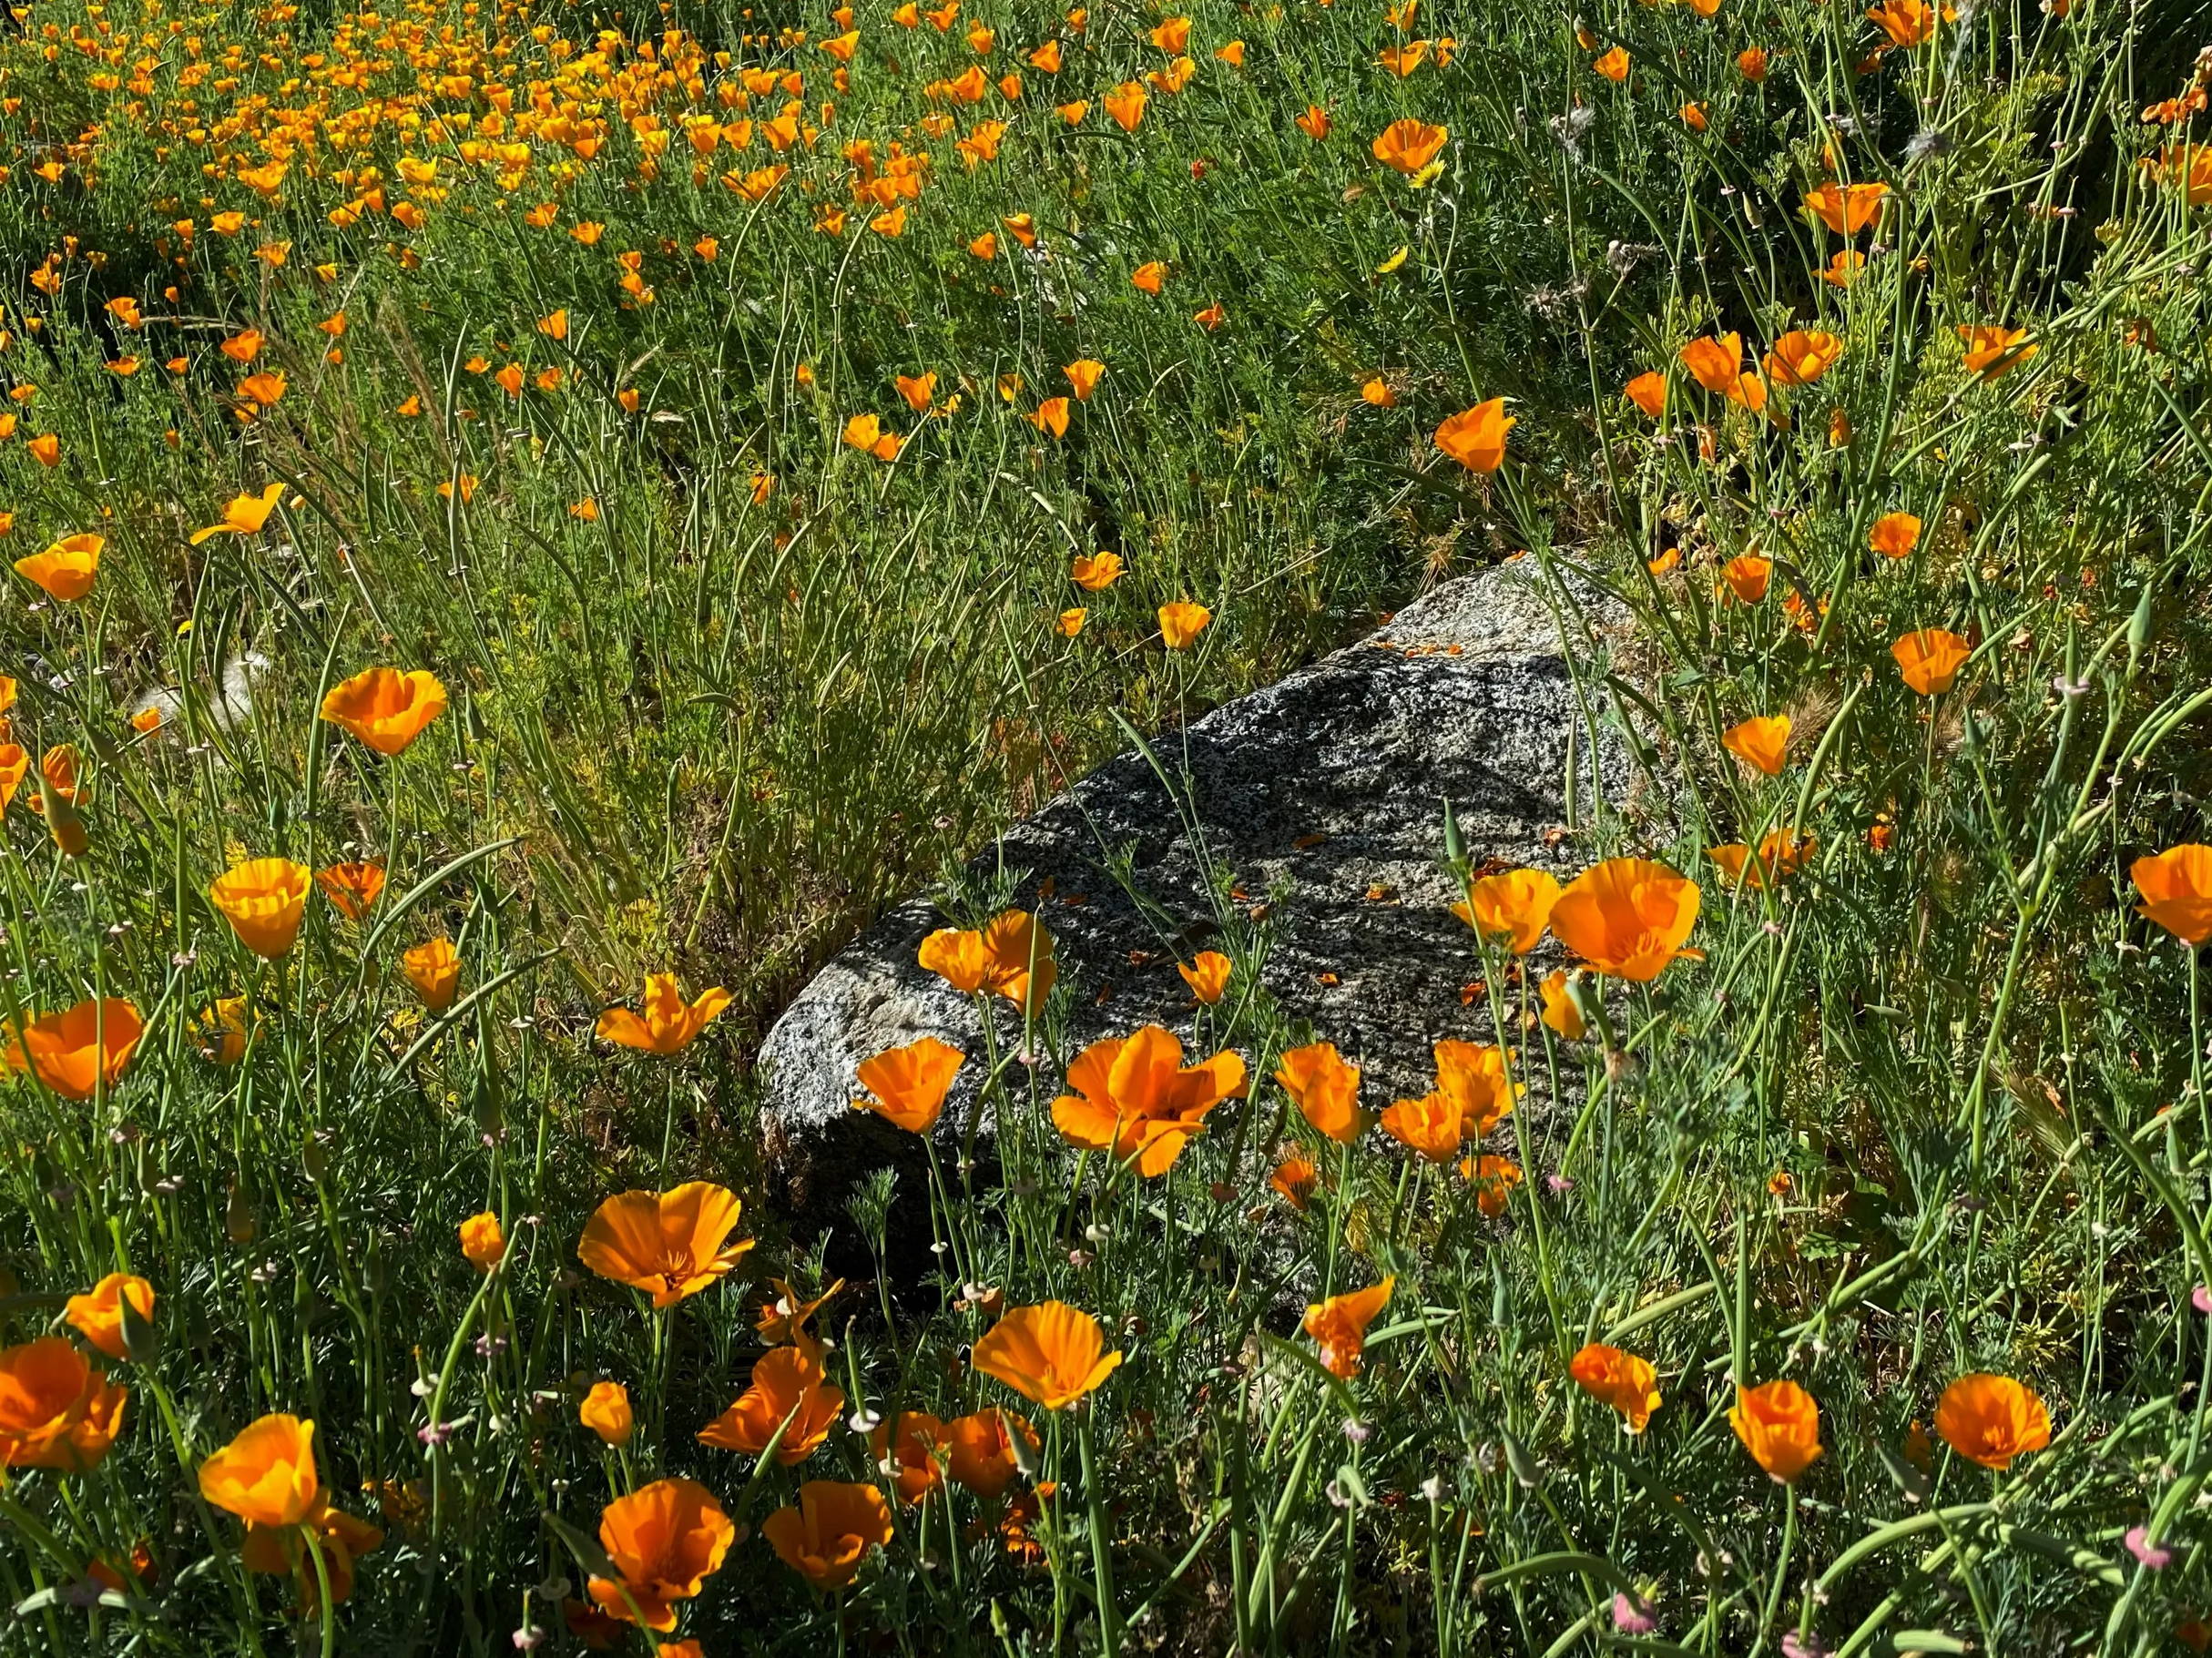 A field of wild poppies